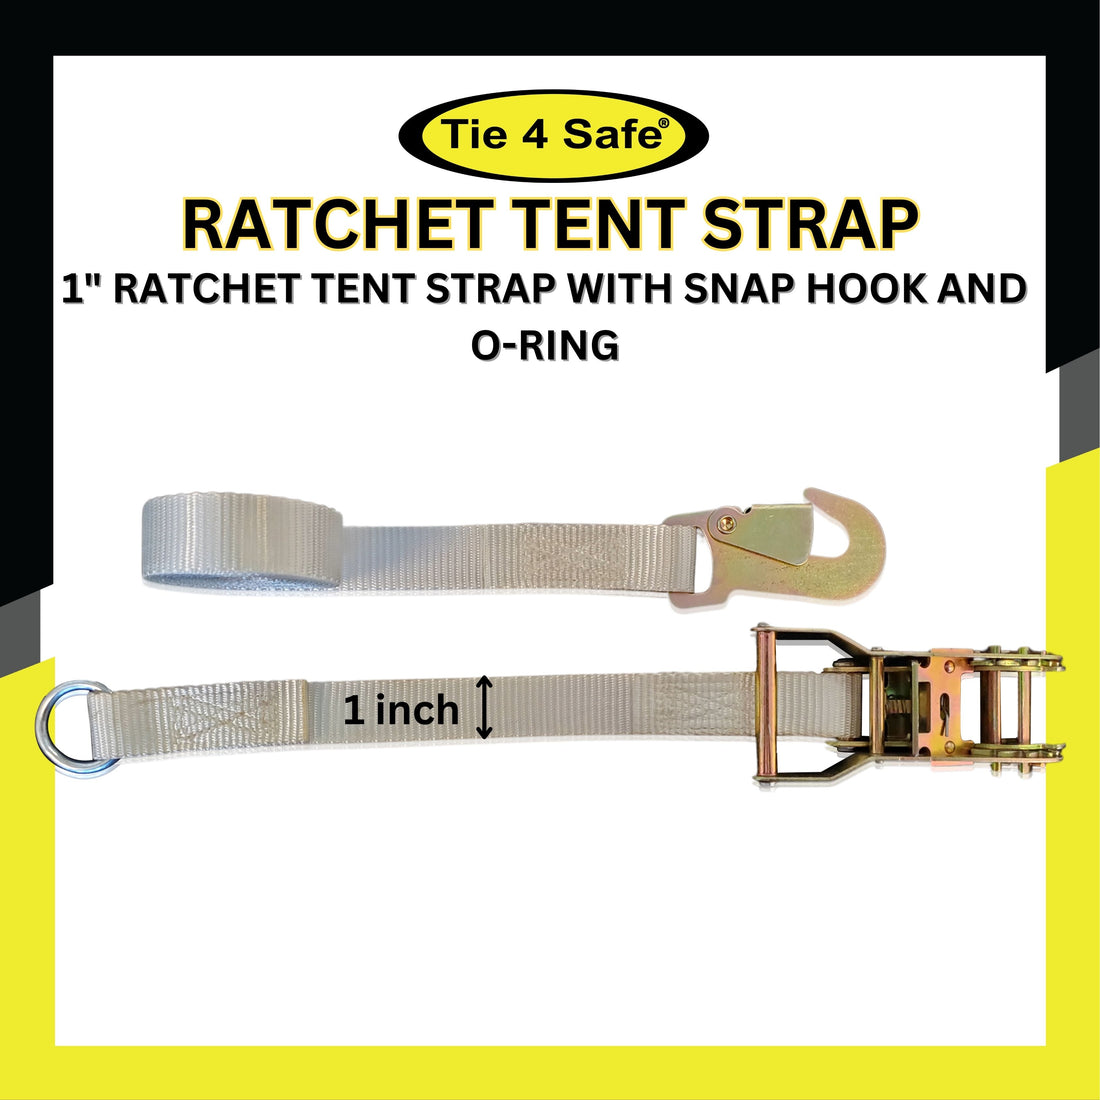 25mm (750kg) Cam buckle tie down system  SECURETECH - 4x4 Recovery  Equipment, Tie Downs, Webbing & Outdoor Gear